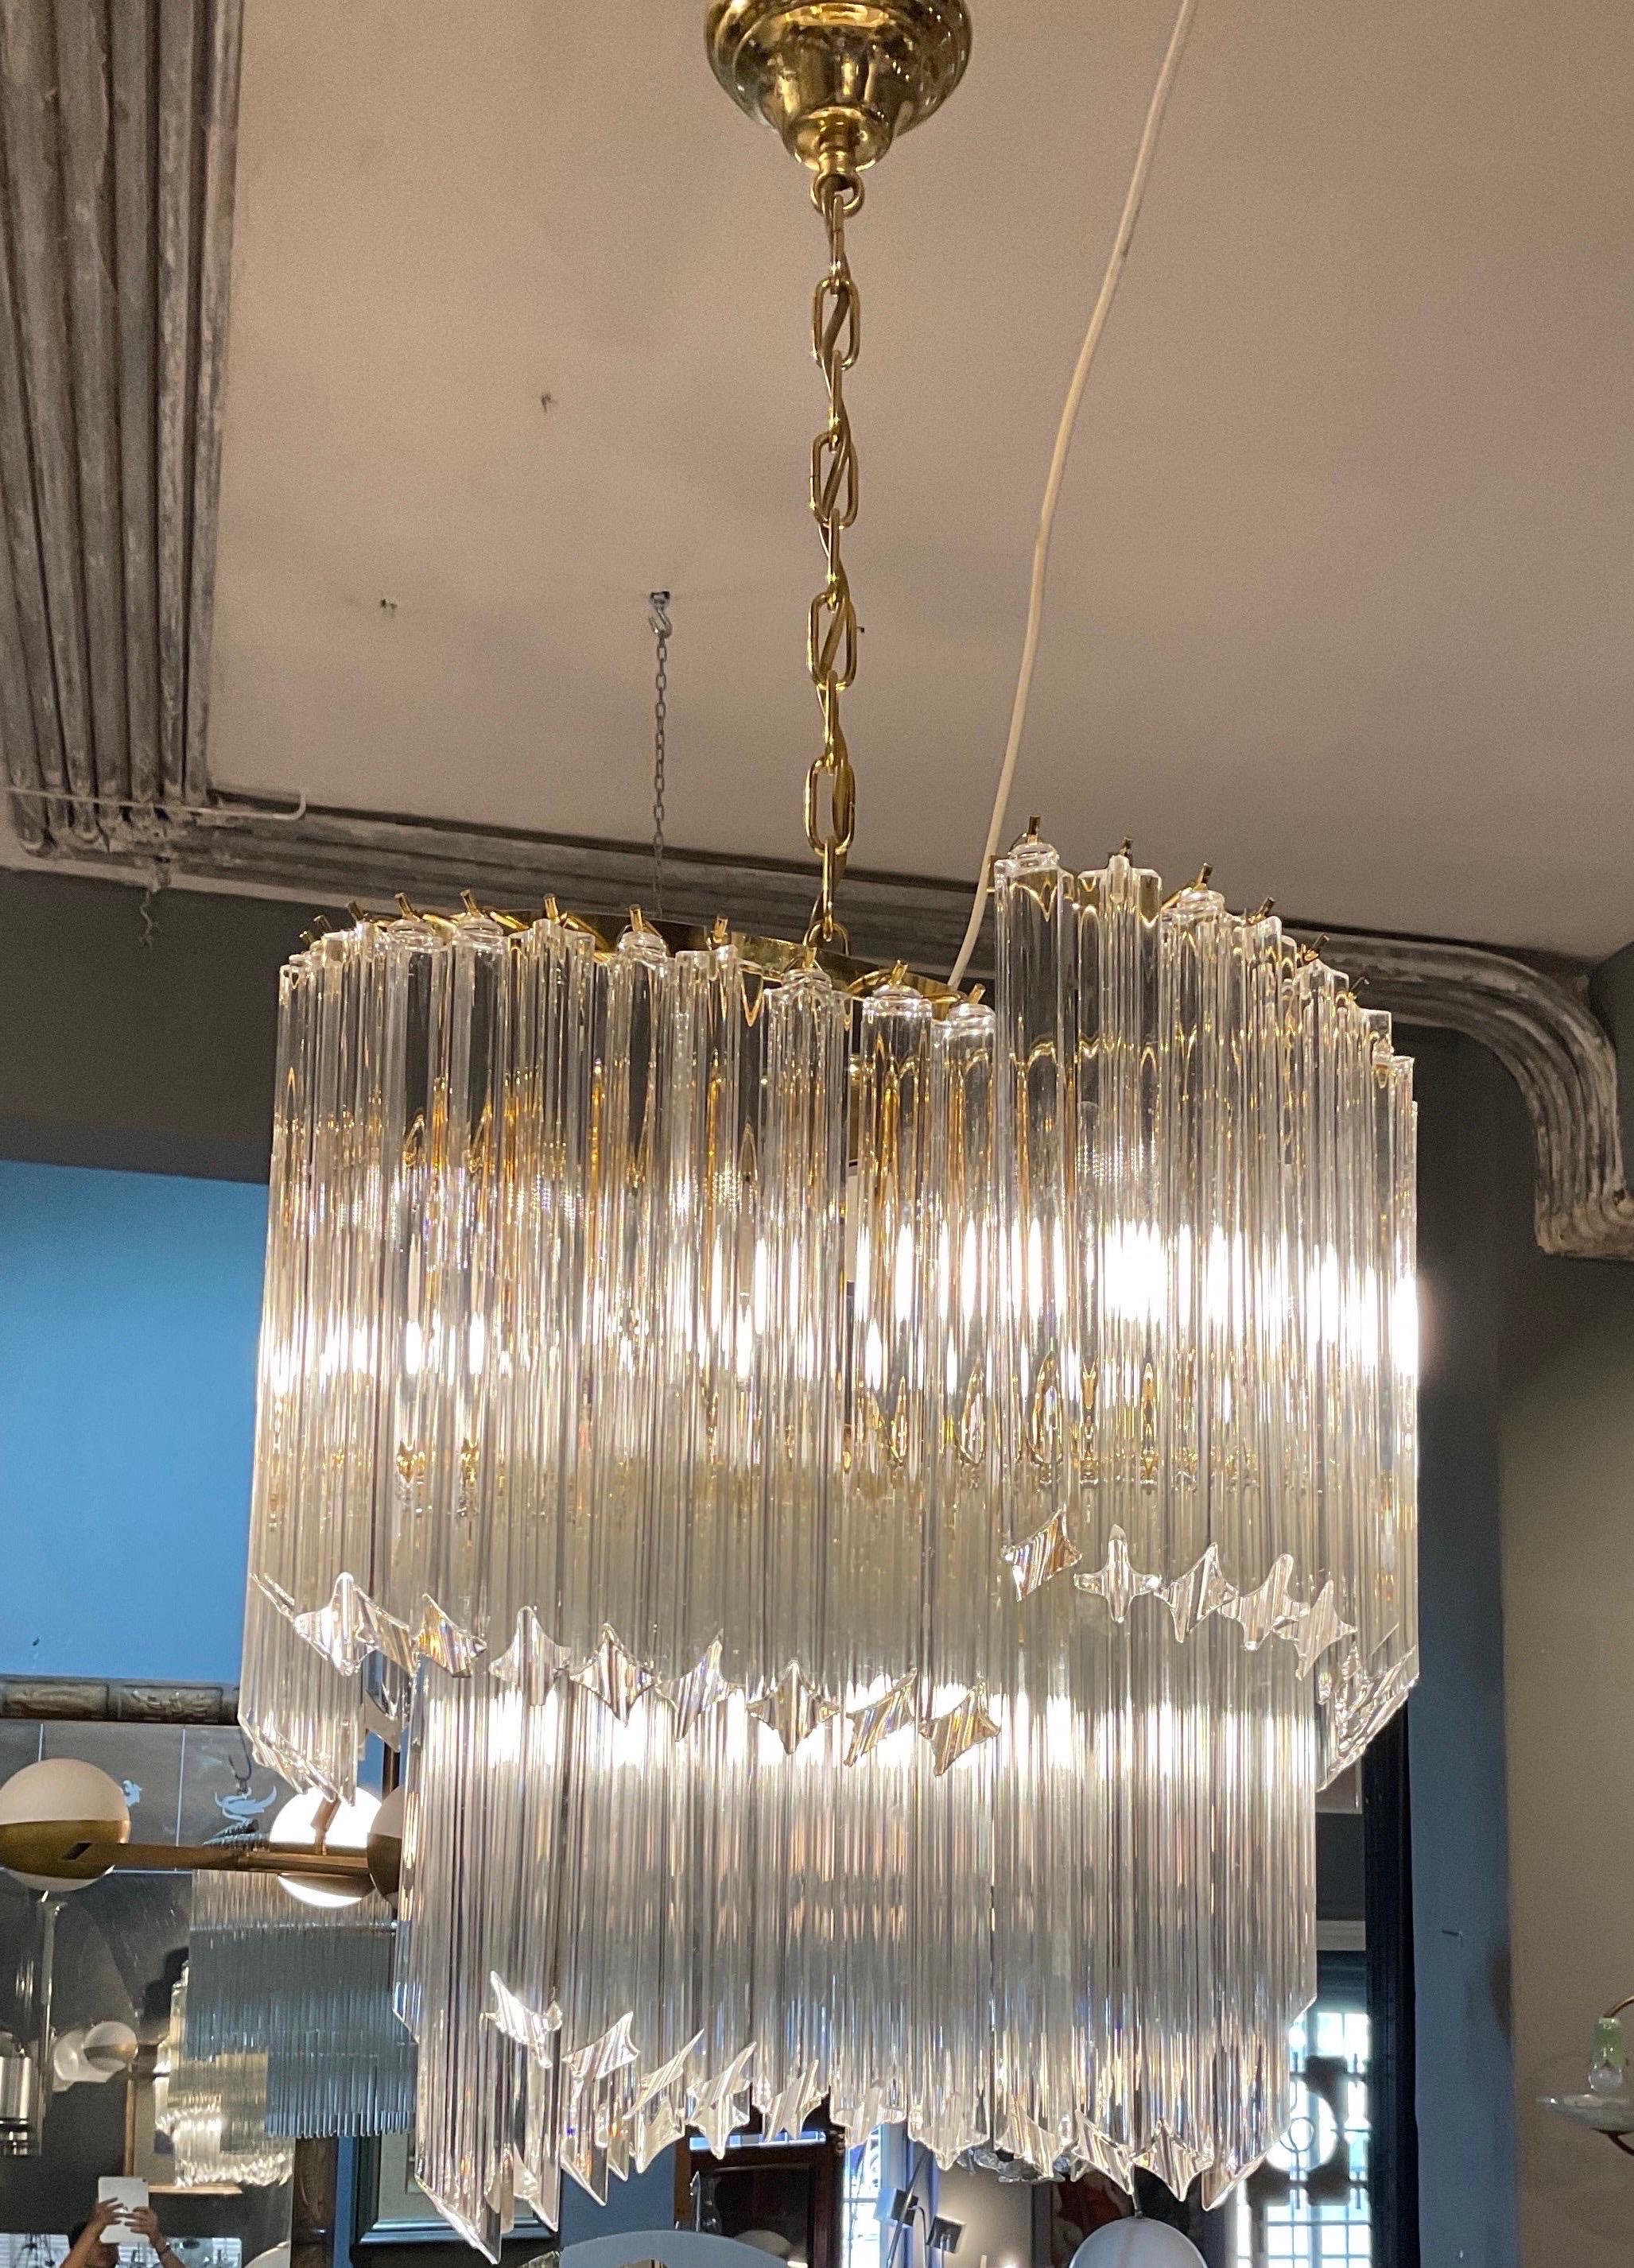 Chandelier of extraordinary beauty of Italian origin in the style of the important Italian designer Paolo Venini with a structure in brass and four-lobe murano glass. Chandelier of extreme beauty and in perfect condition.